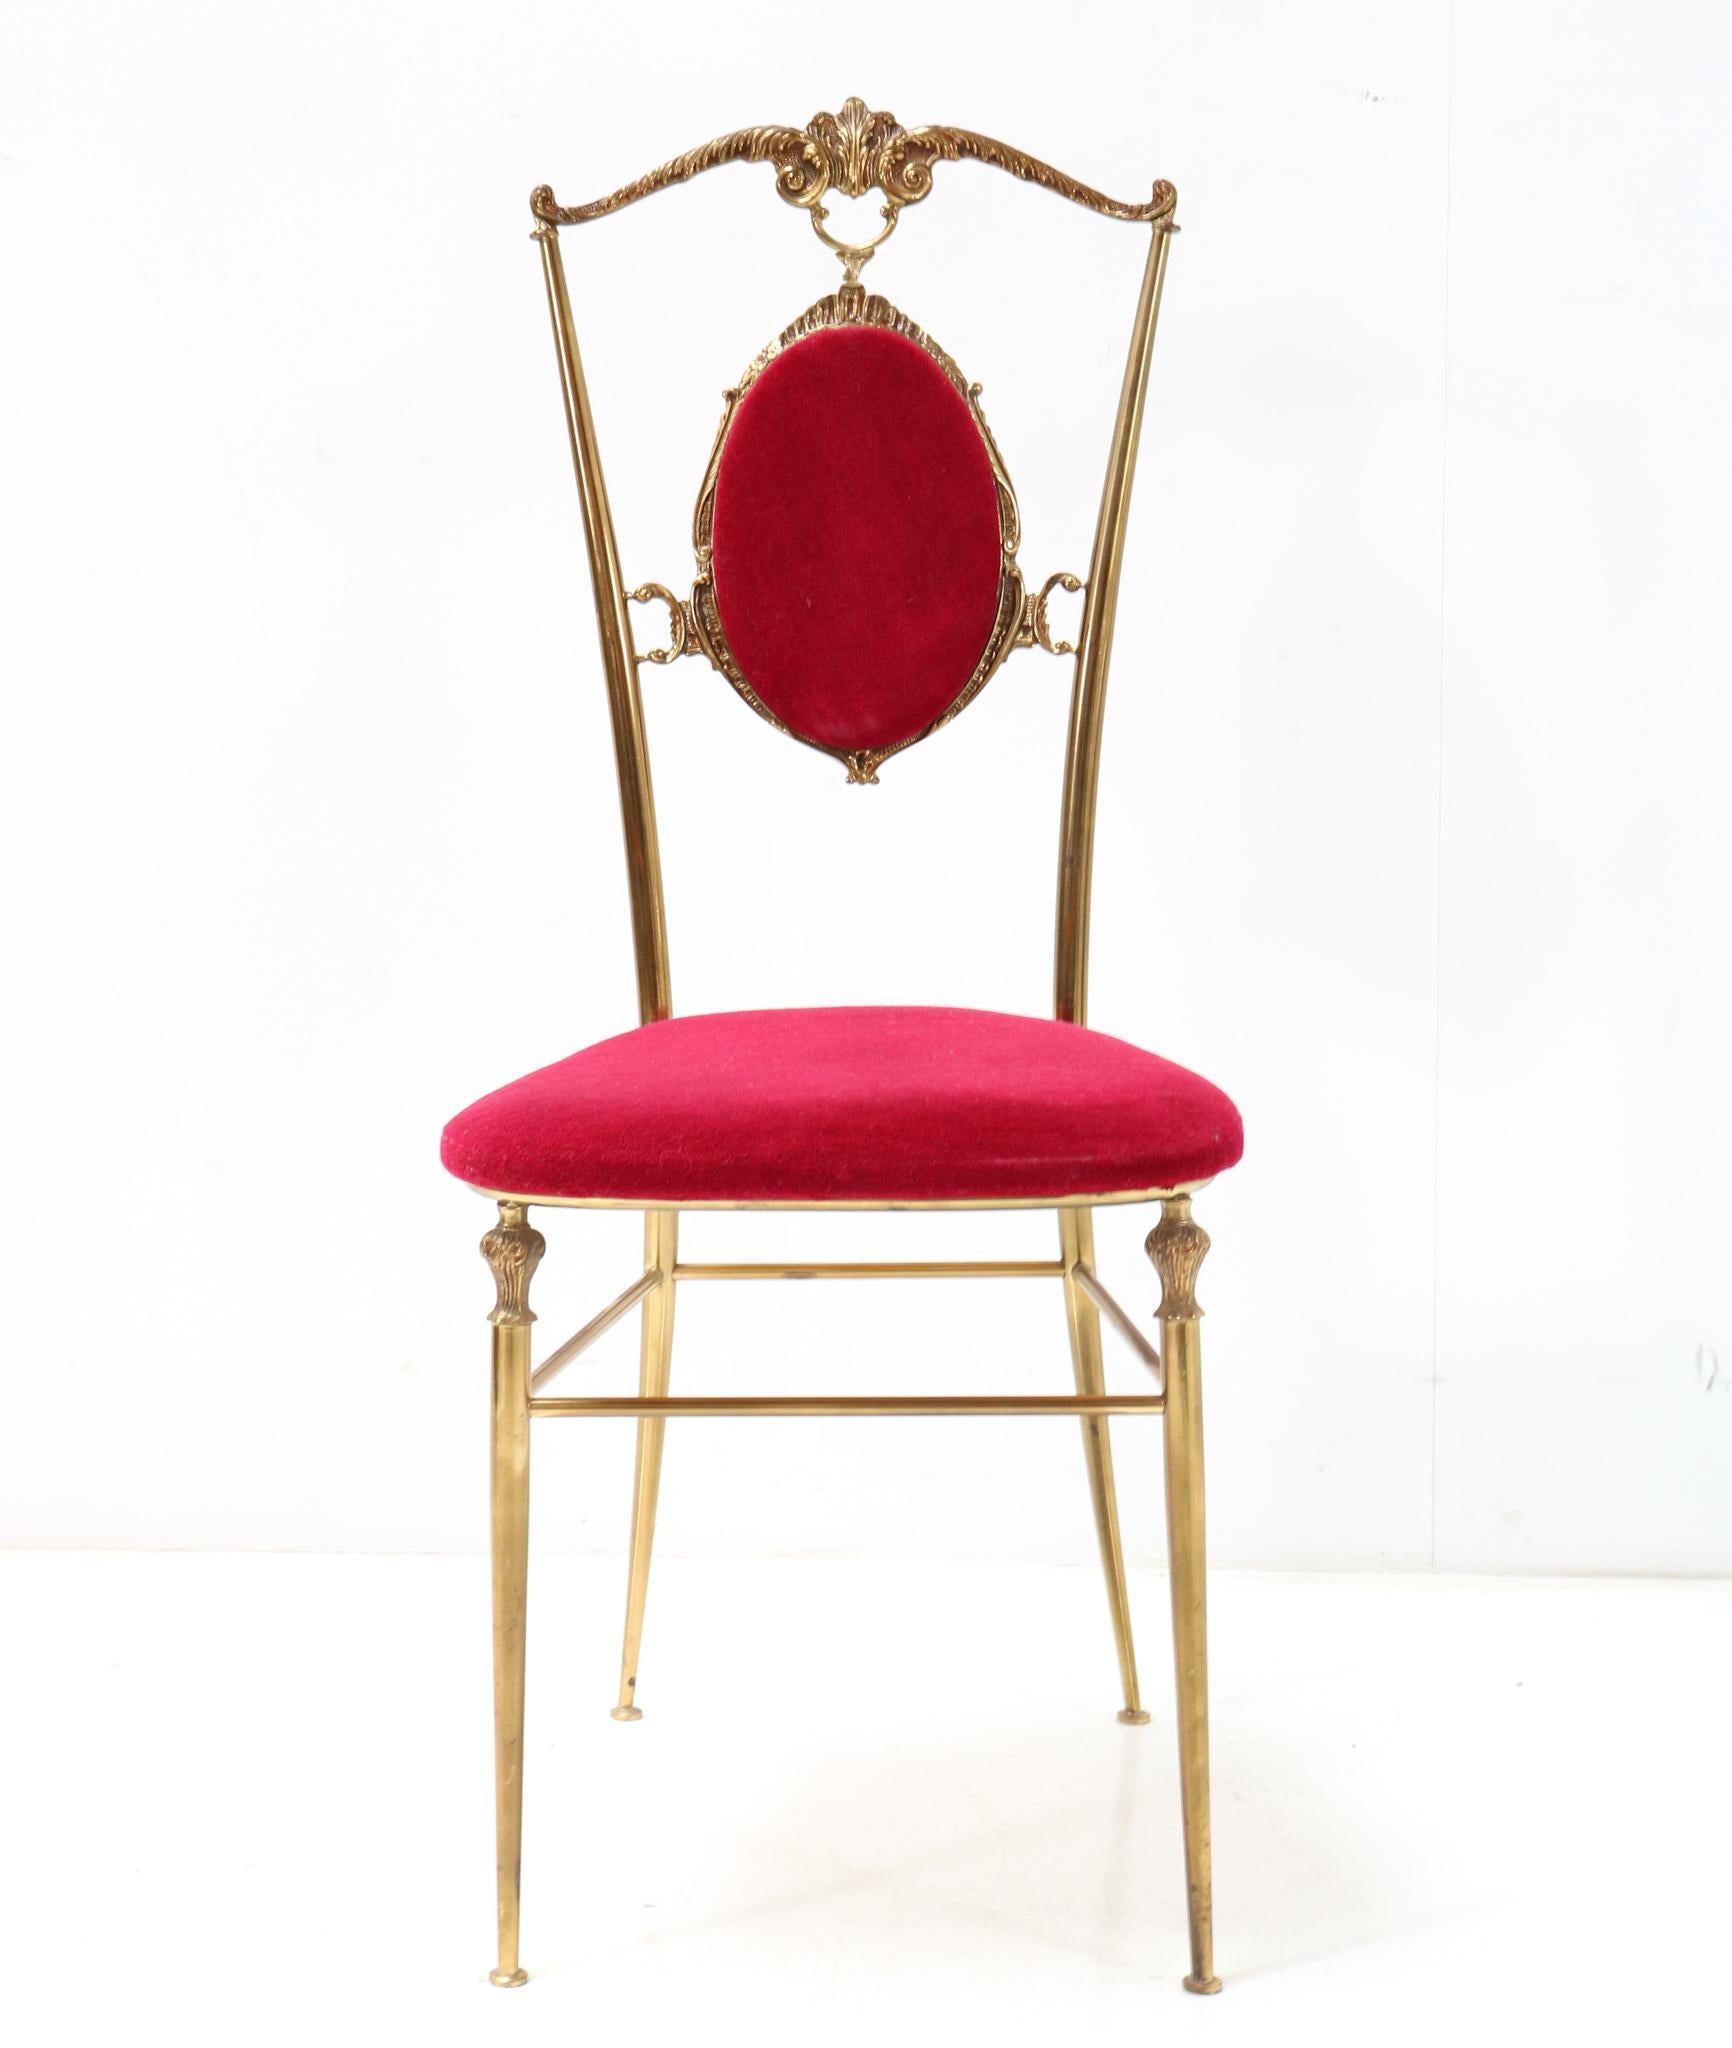 Stunning and elegant Mid-Century Modern side chair.
Design by Chiavari.
Striking Italian design from the 1960s.
Solid brass frame with original red velvet seat and back.
In good original condition with minor wear consistent with age and use,